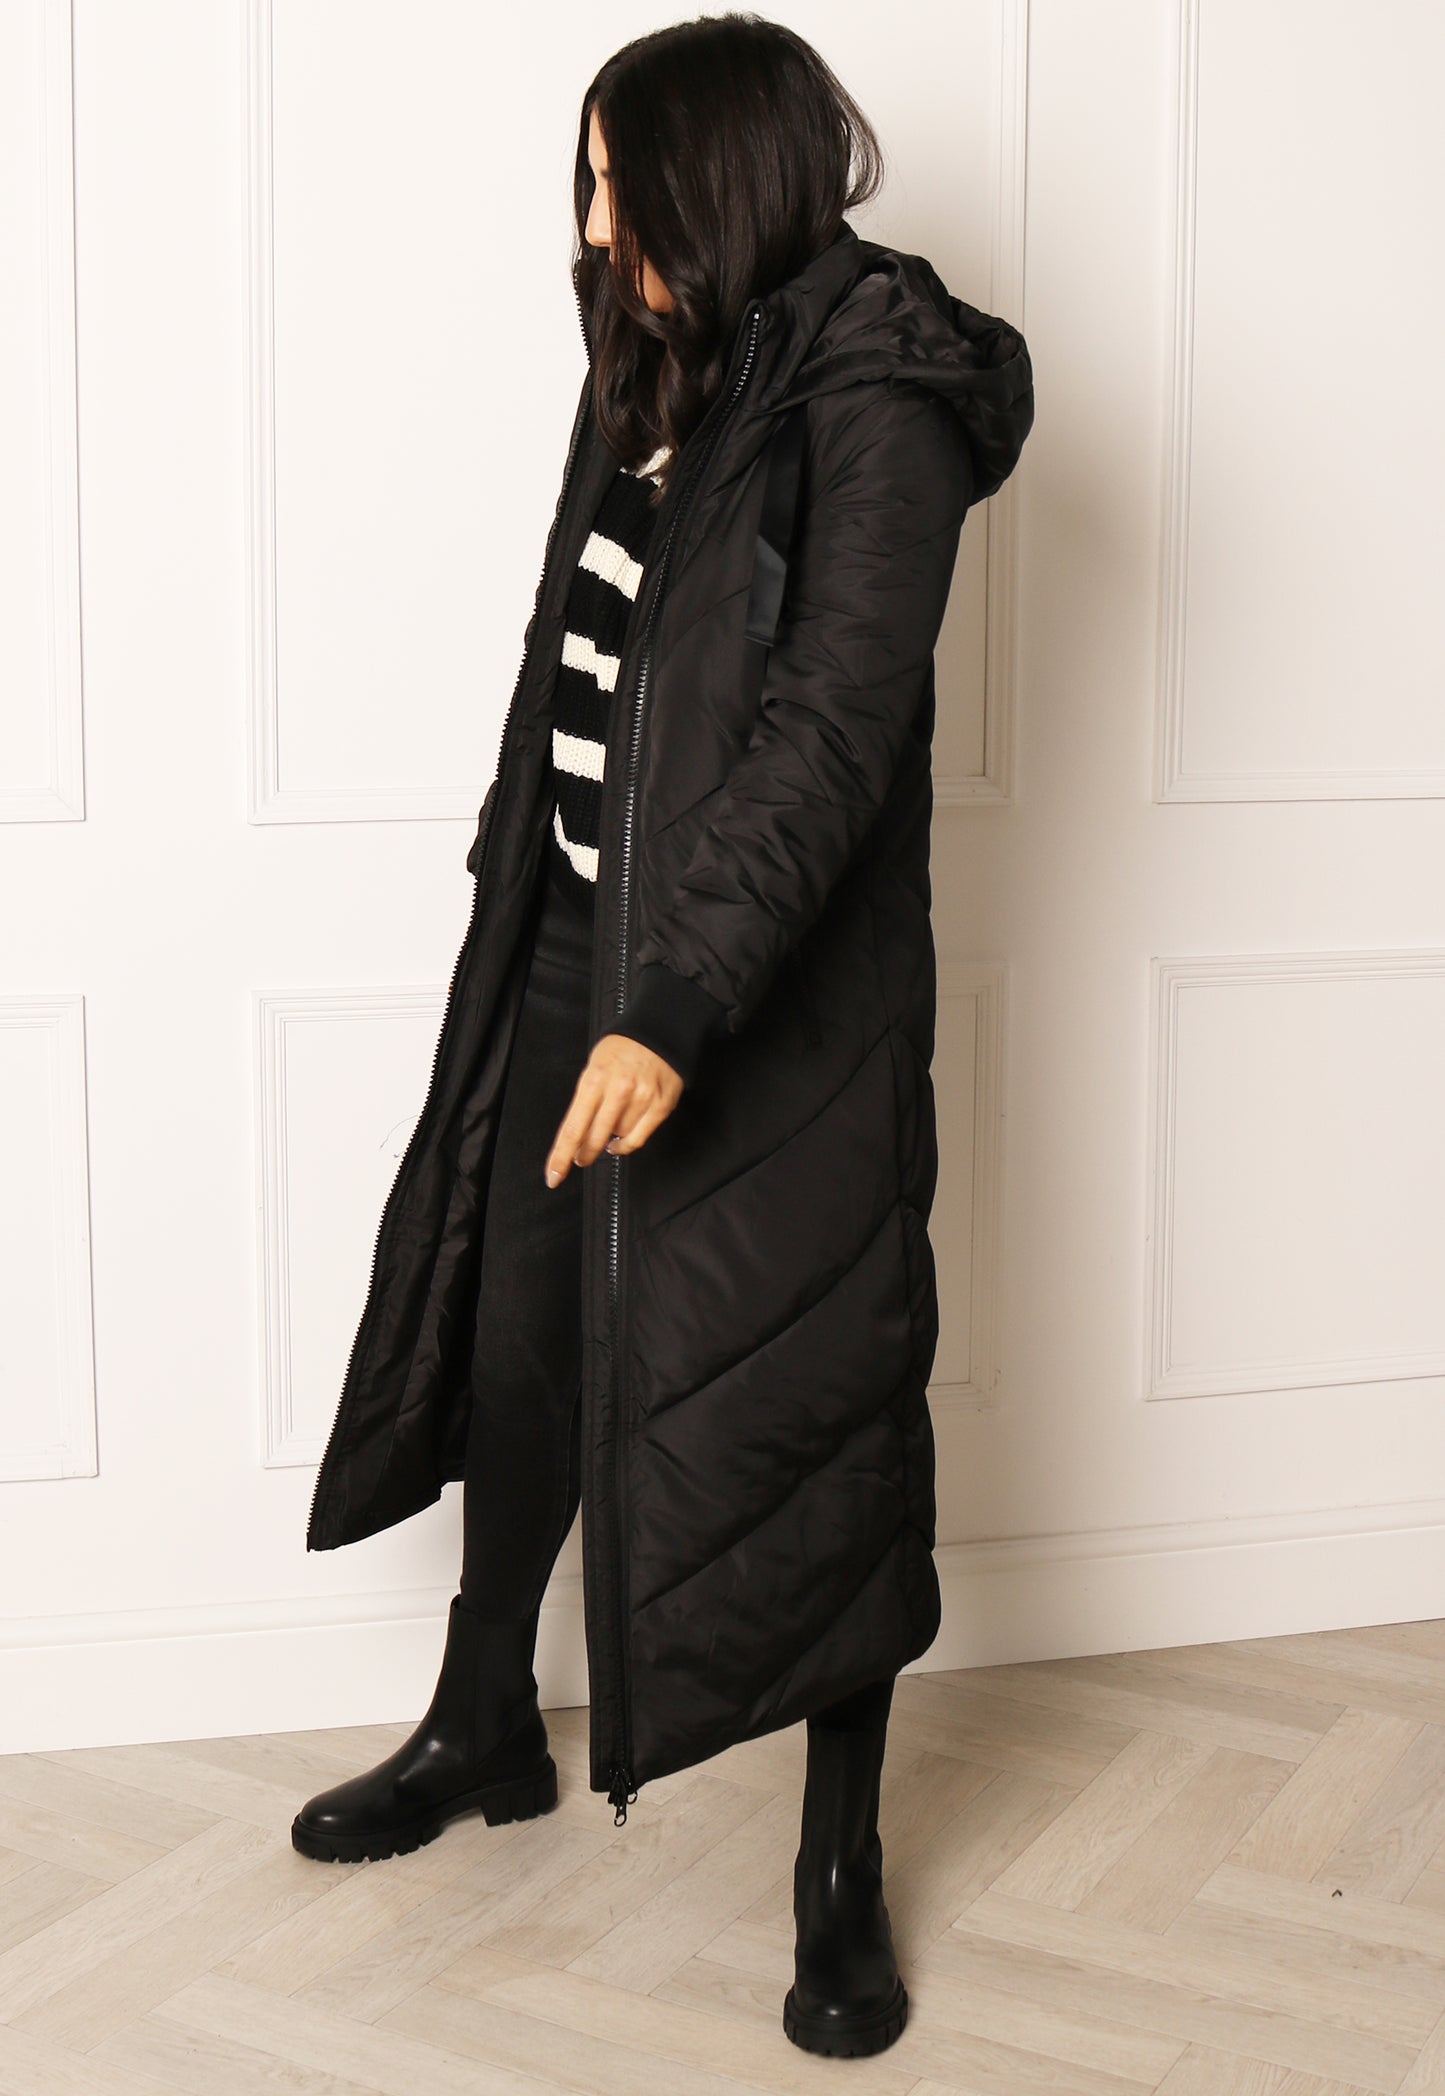 JDY Maxi Skylar Chevron Quilted Hooded Puffer Coat in Black - concretebartops